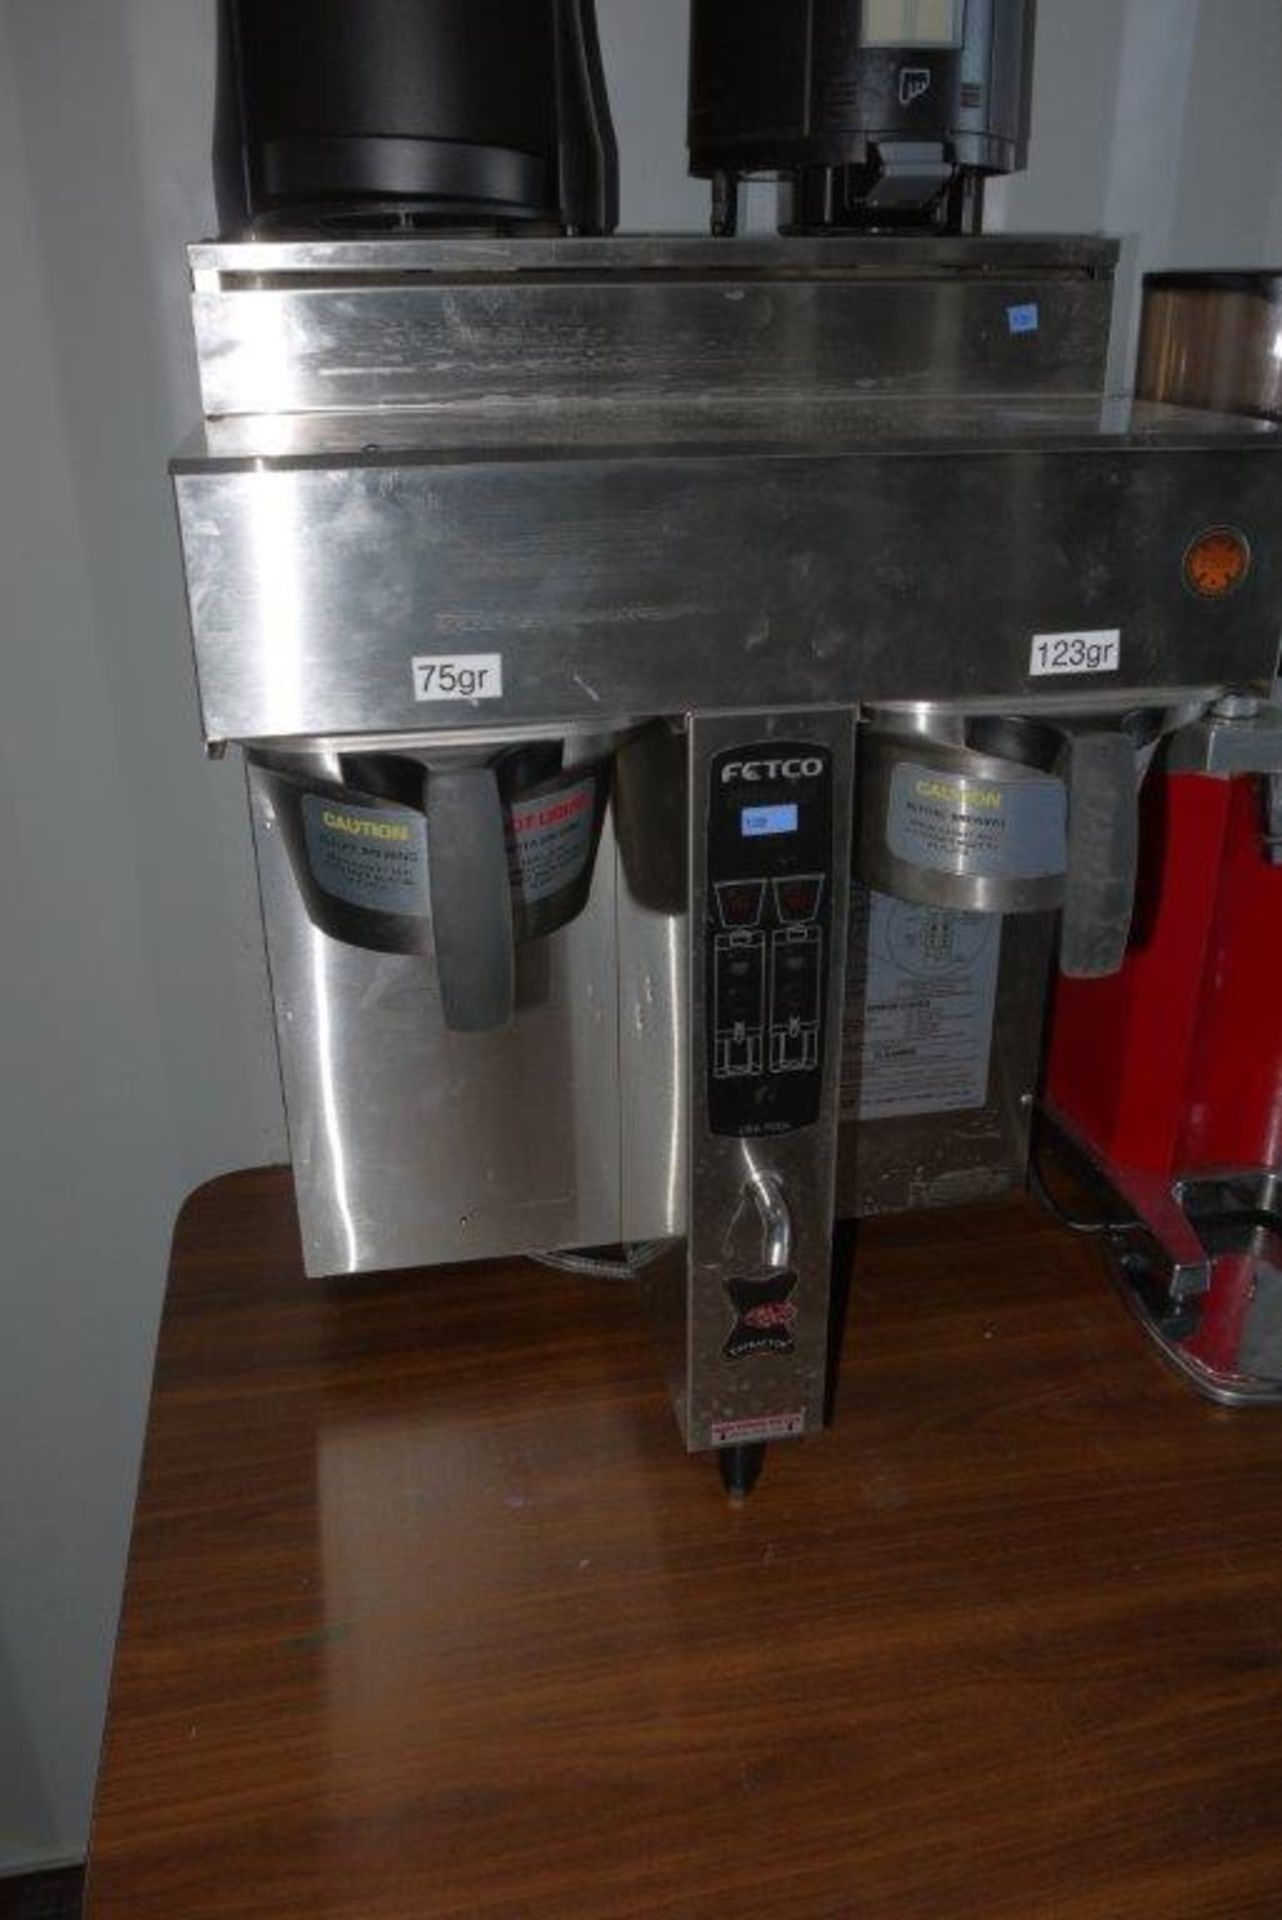 2013 FETCO DOUBLE STATION COFFEE BREWER, MODEL CBS 2032E, S/N 720143138478, SINGLE PHASE, C/W - Image 3 of 9